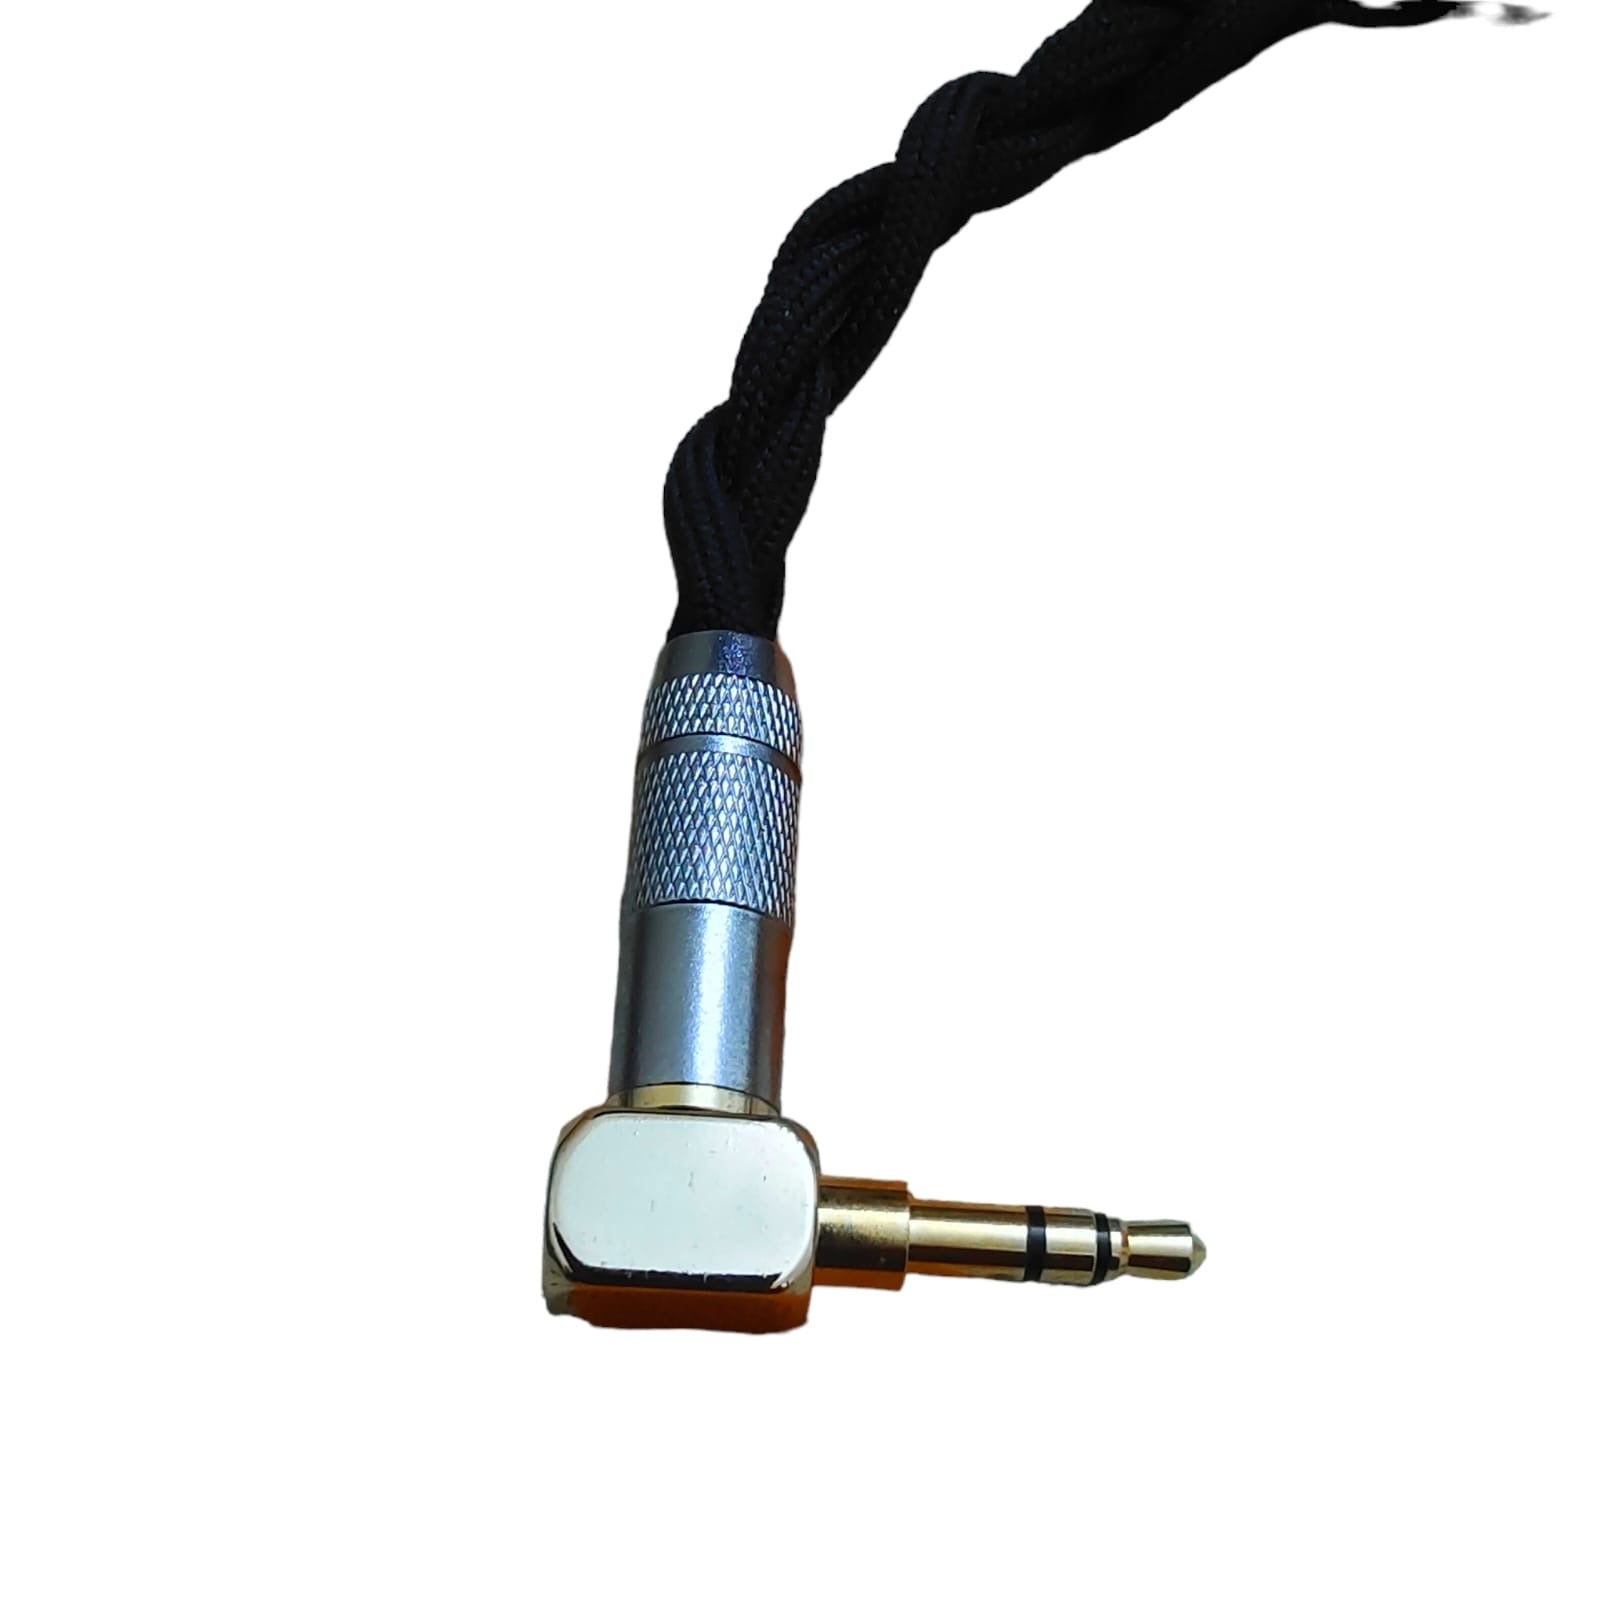 EarAudio Premium 3.5mm To 3.5mm Interconnect cable